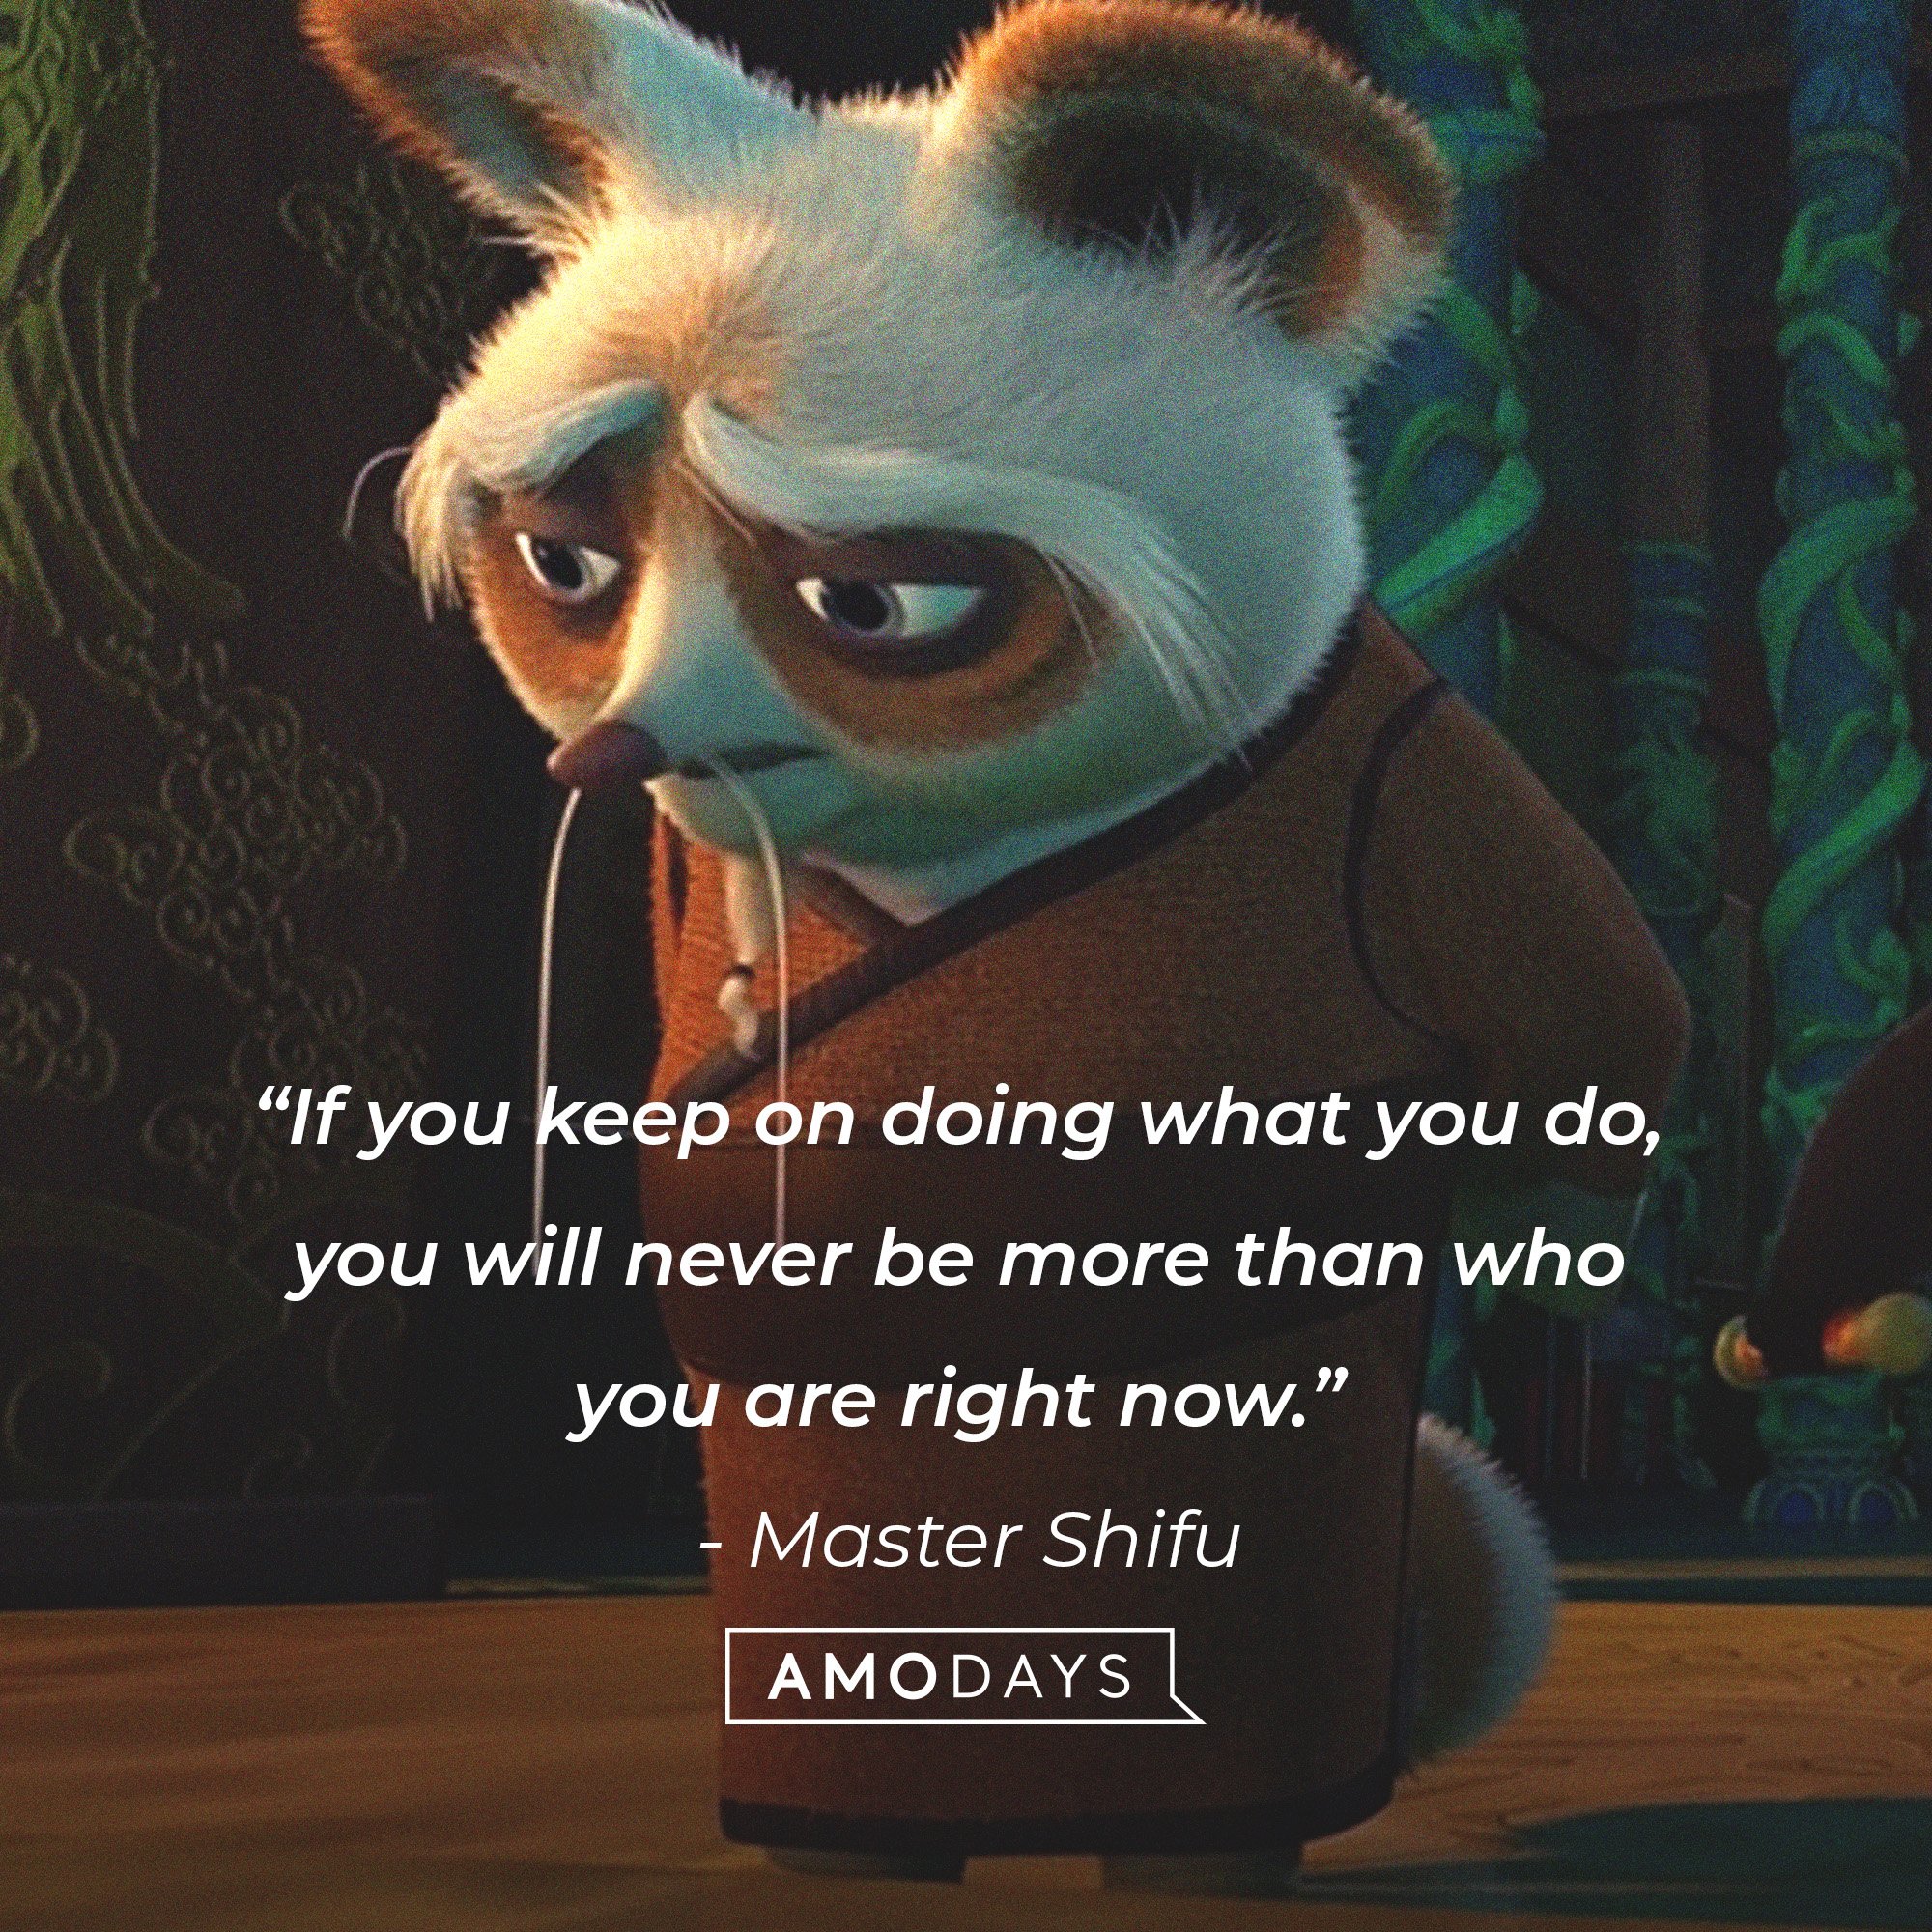  Master Shifu’s quote: “If you keep on doing what you do, you will never be more than who you are right now.” | Image: AmoDays